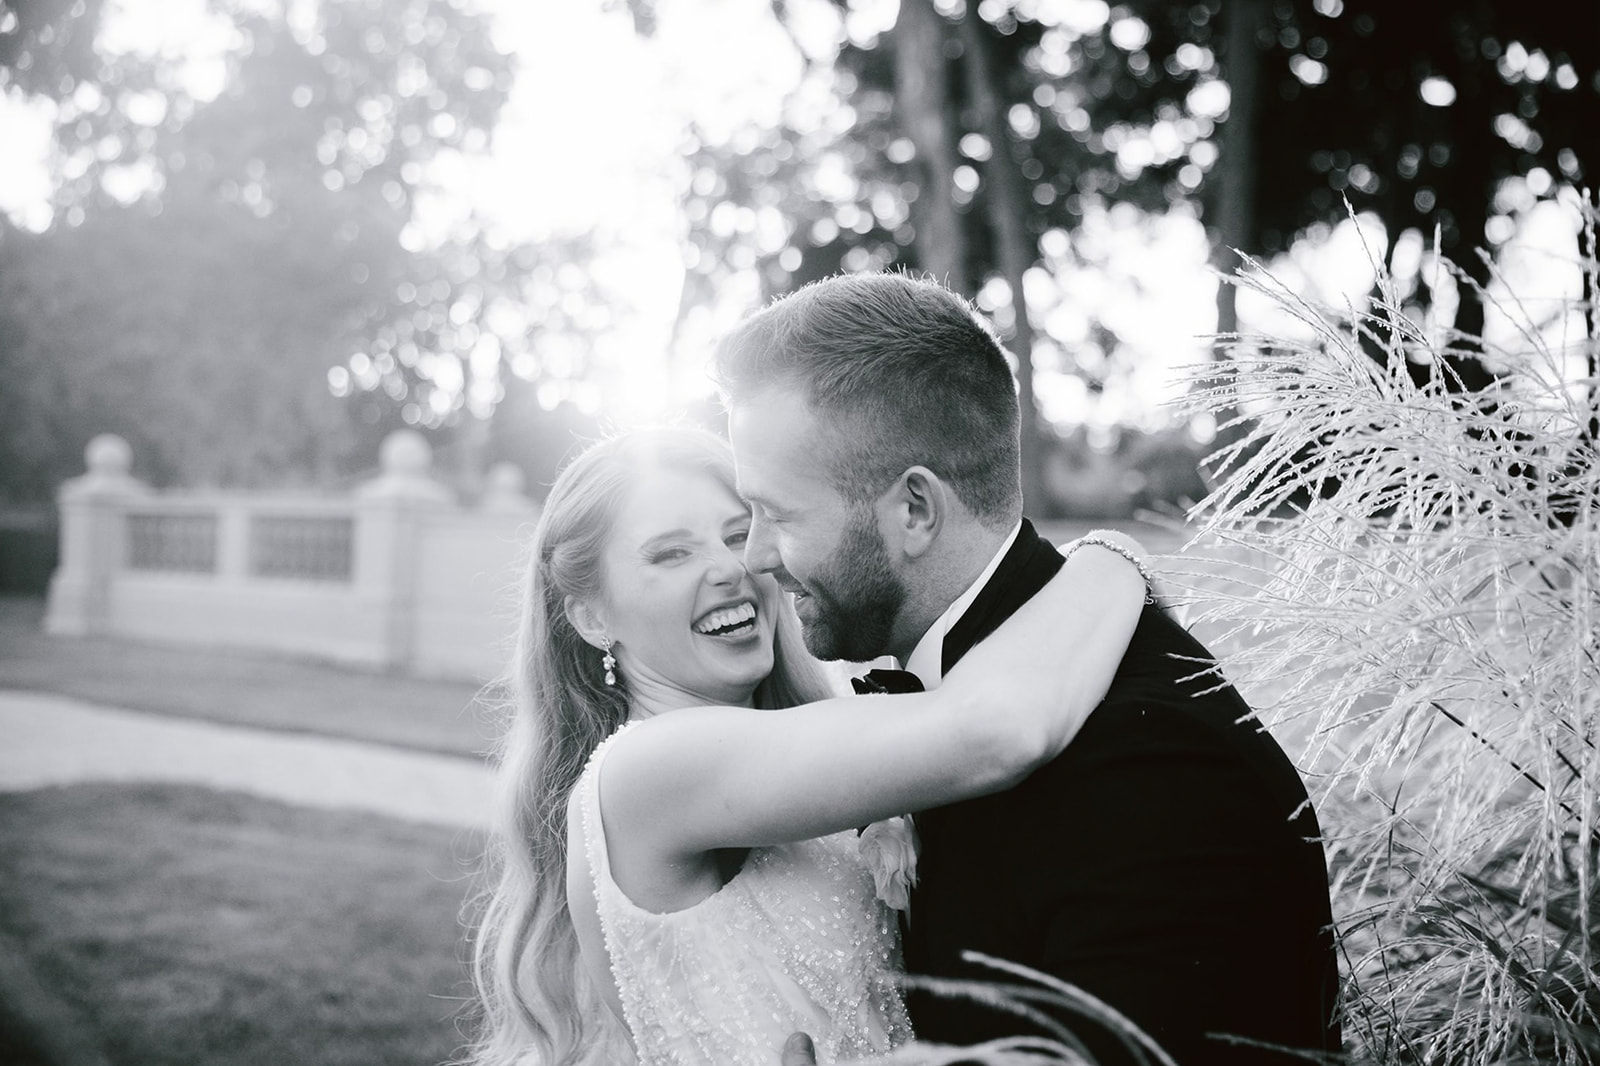 Stunning sunset captures at Armour House frame the love and beauty of the bride and groom's unforgettable day.